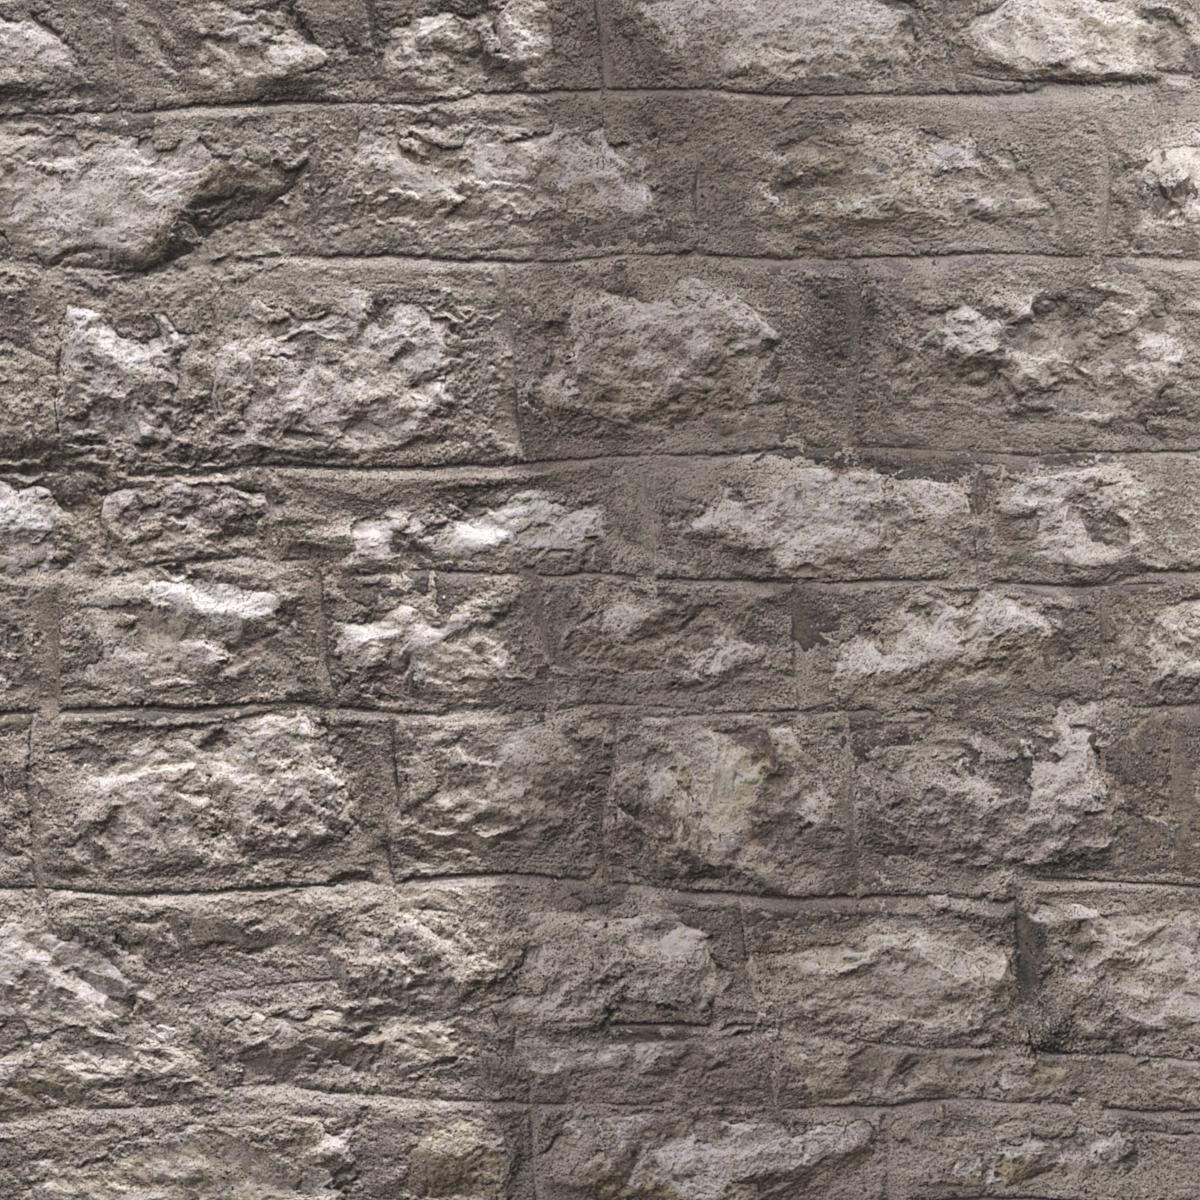 STONE-WALL-MEDIEVAL-23